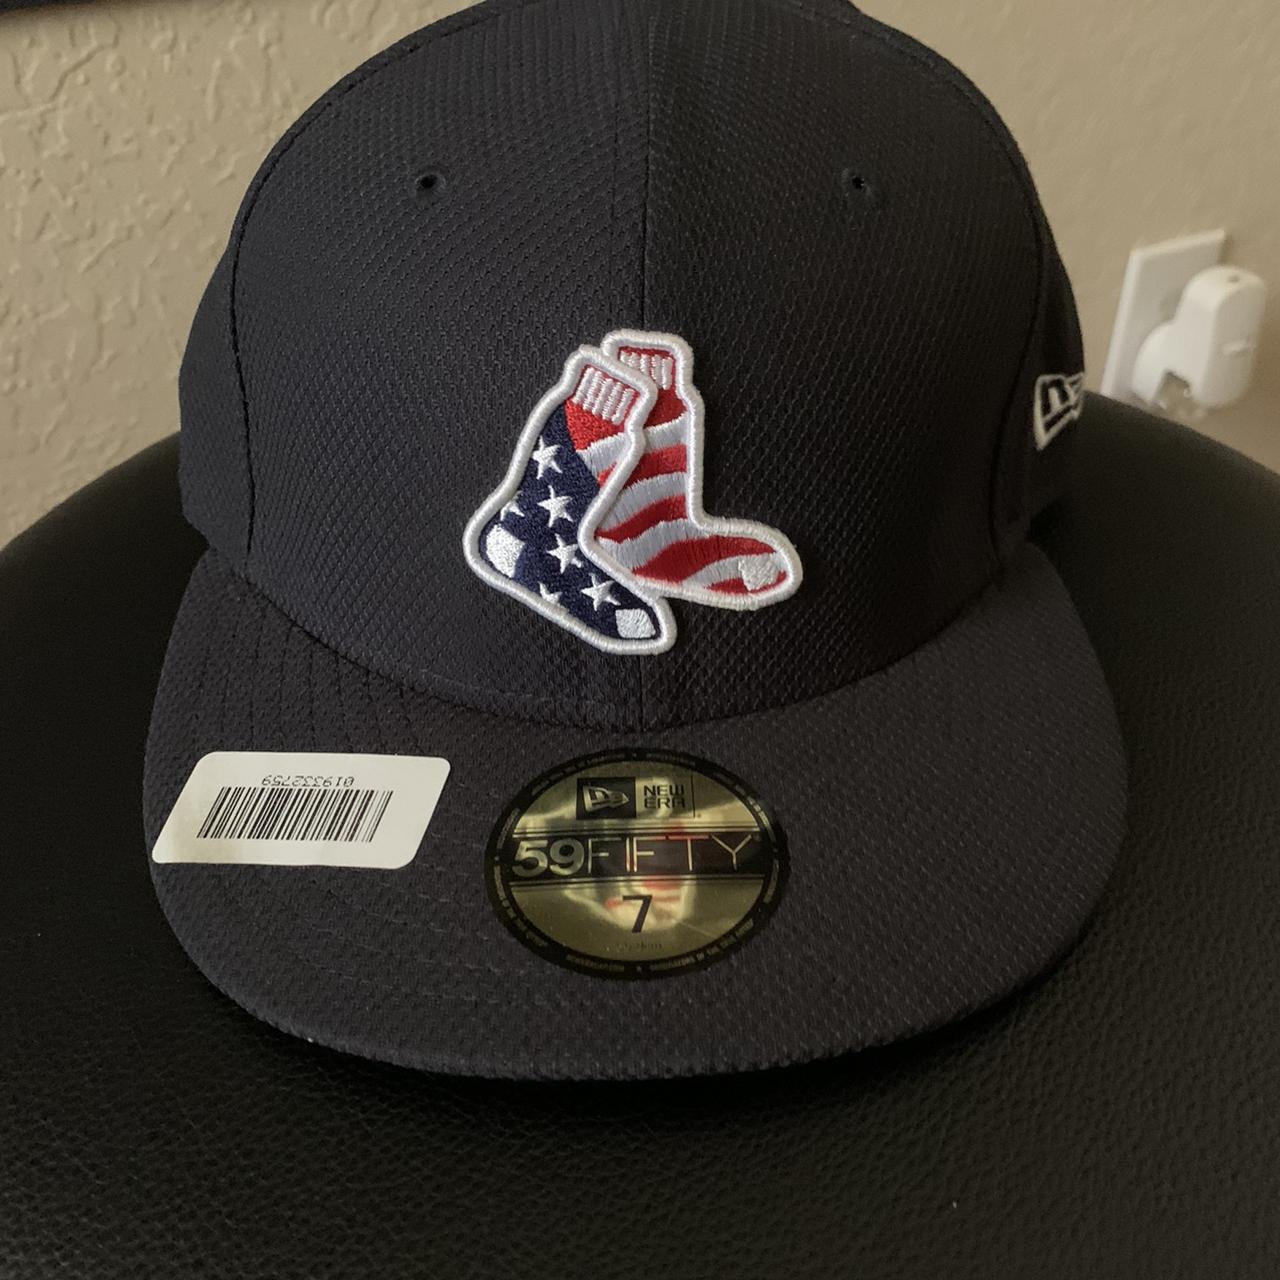 Boston Red Sox New Era 5950 July 4th Fitted Hat